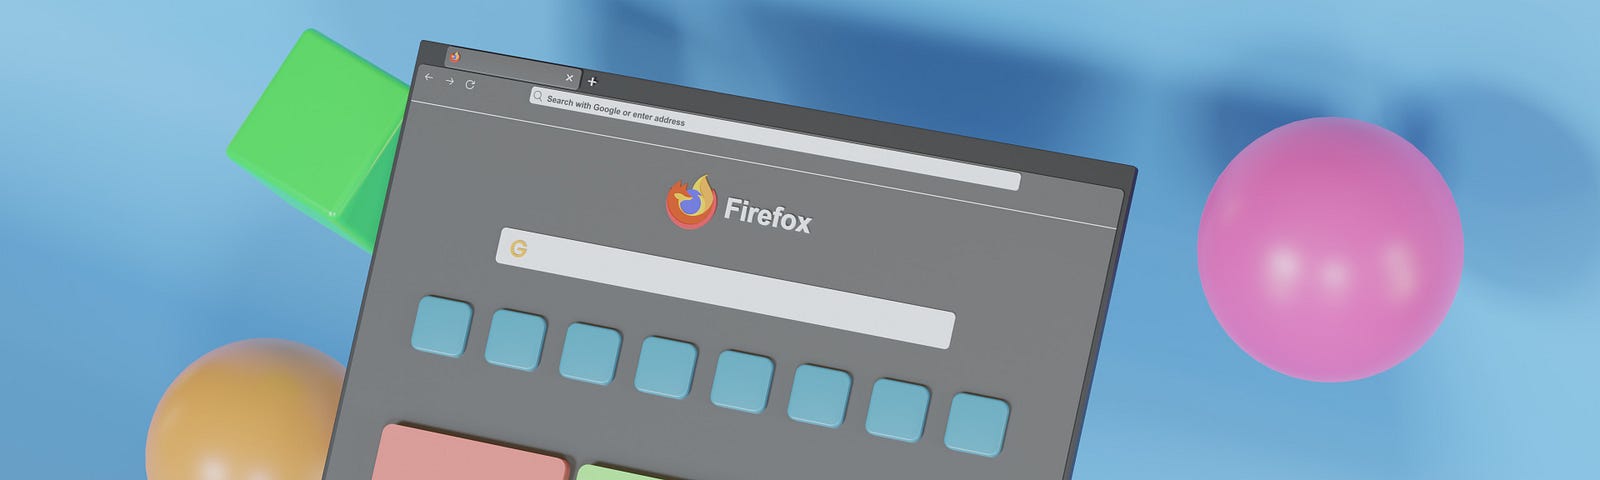 A cartoon version of the Firefox browser